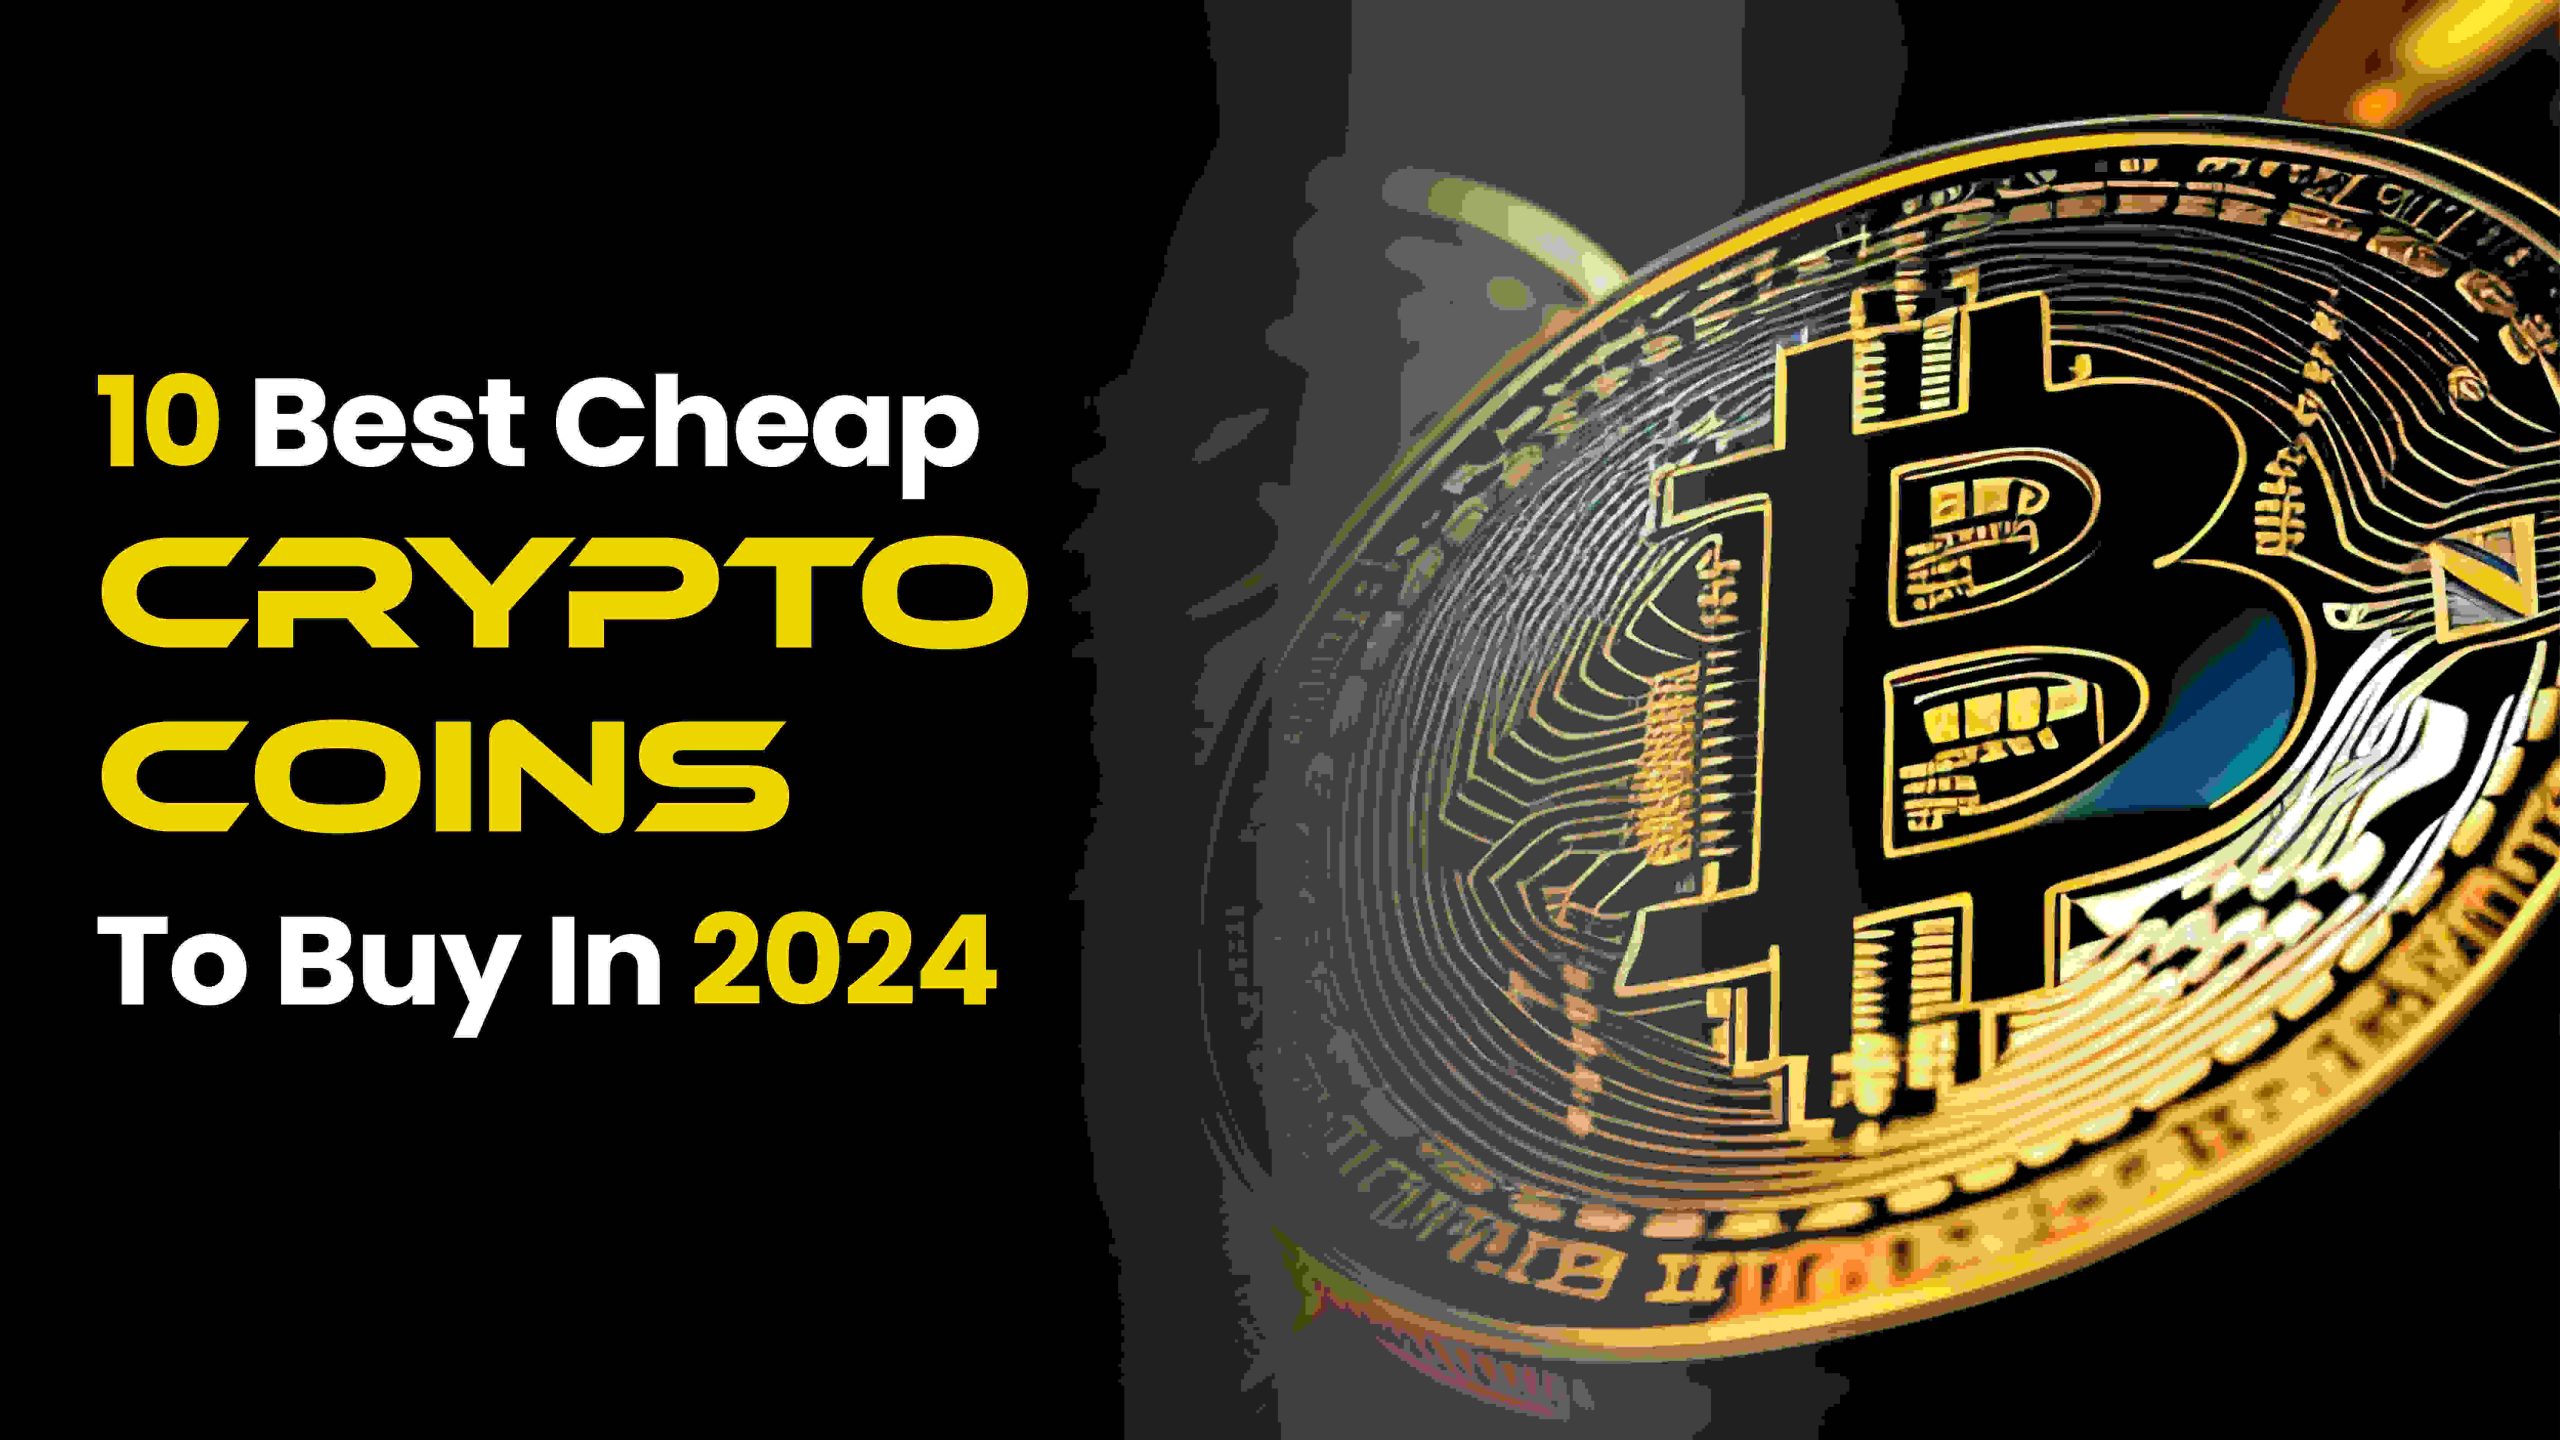 10 Best Cheap Crypto Coins to Buy in 2024